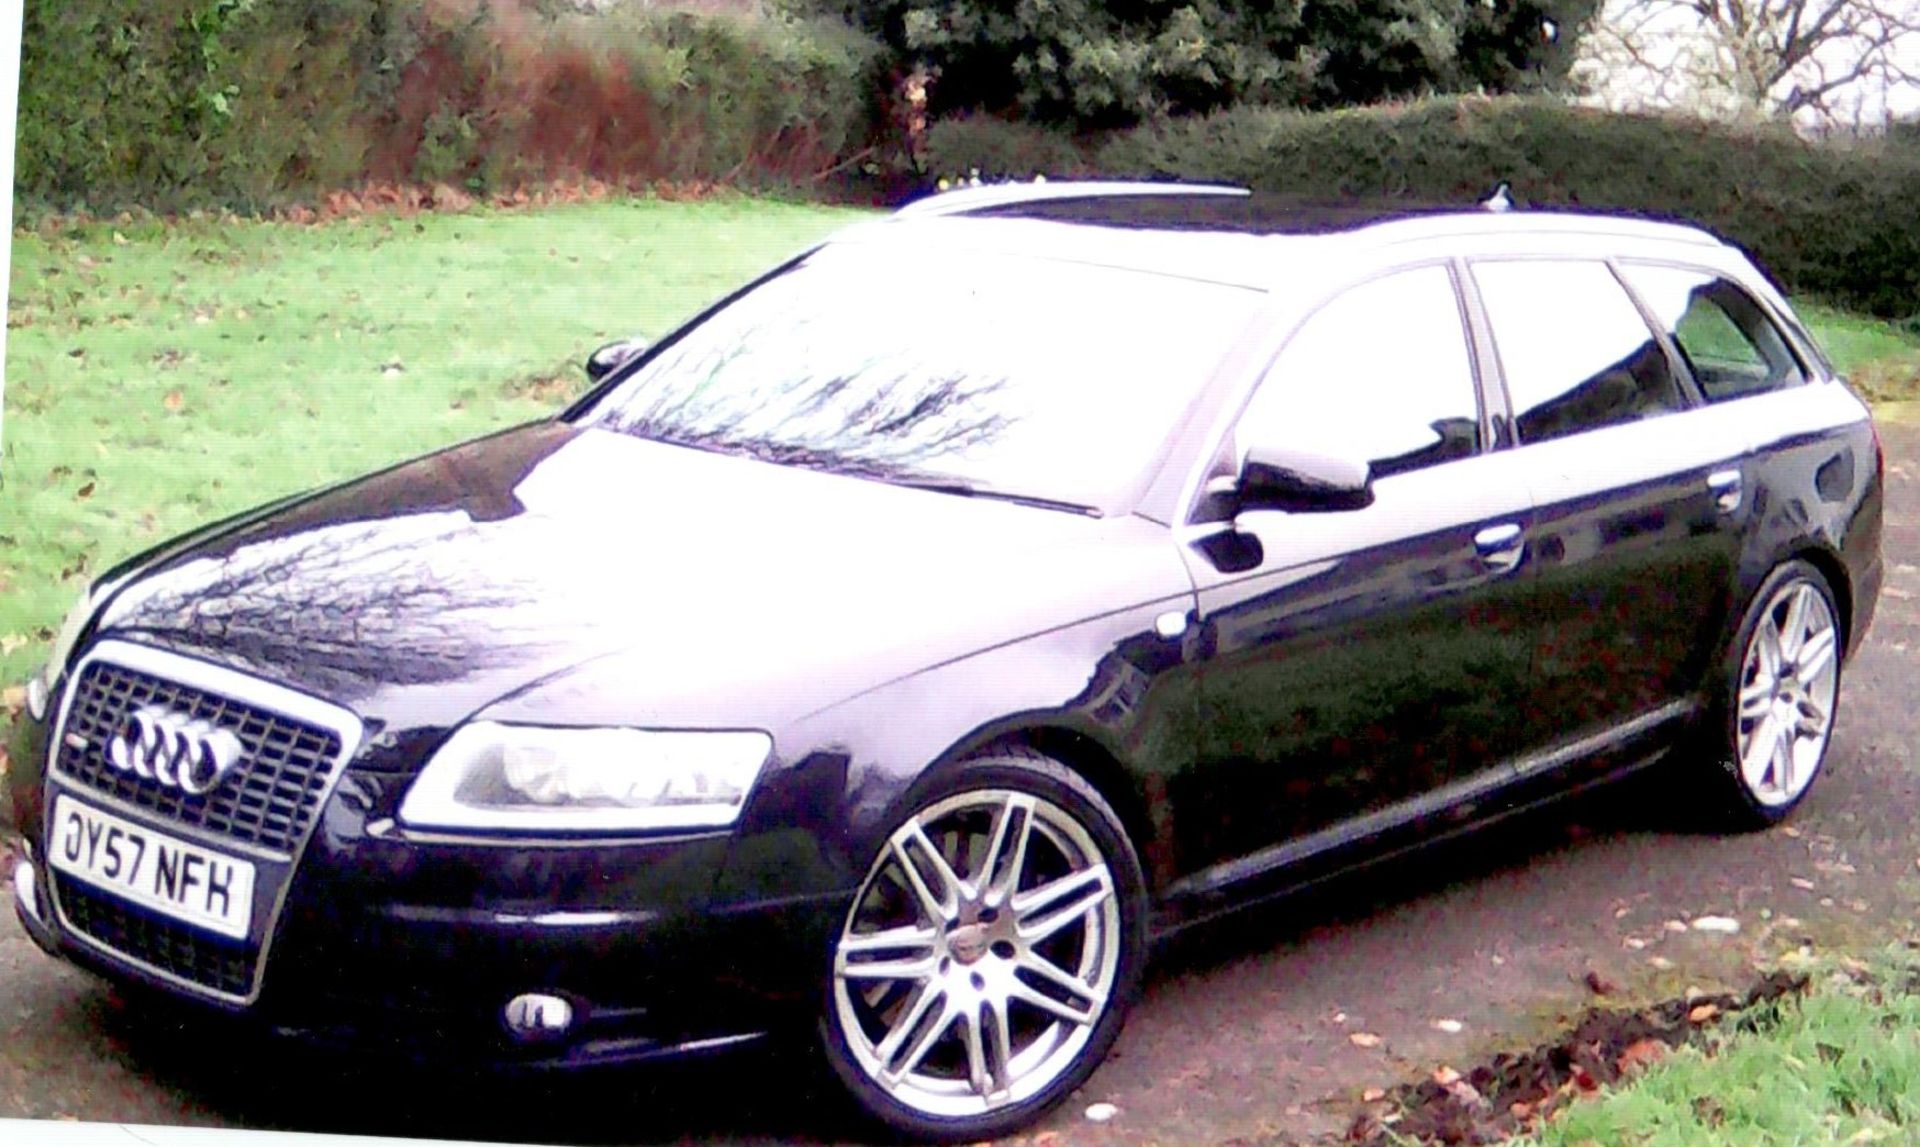 2007 Audi A6 Avant 2.7 TDi Registration number OY57 NFH Chassis number WAUZZZ4F58N016755 Engine - Image 10 of 17